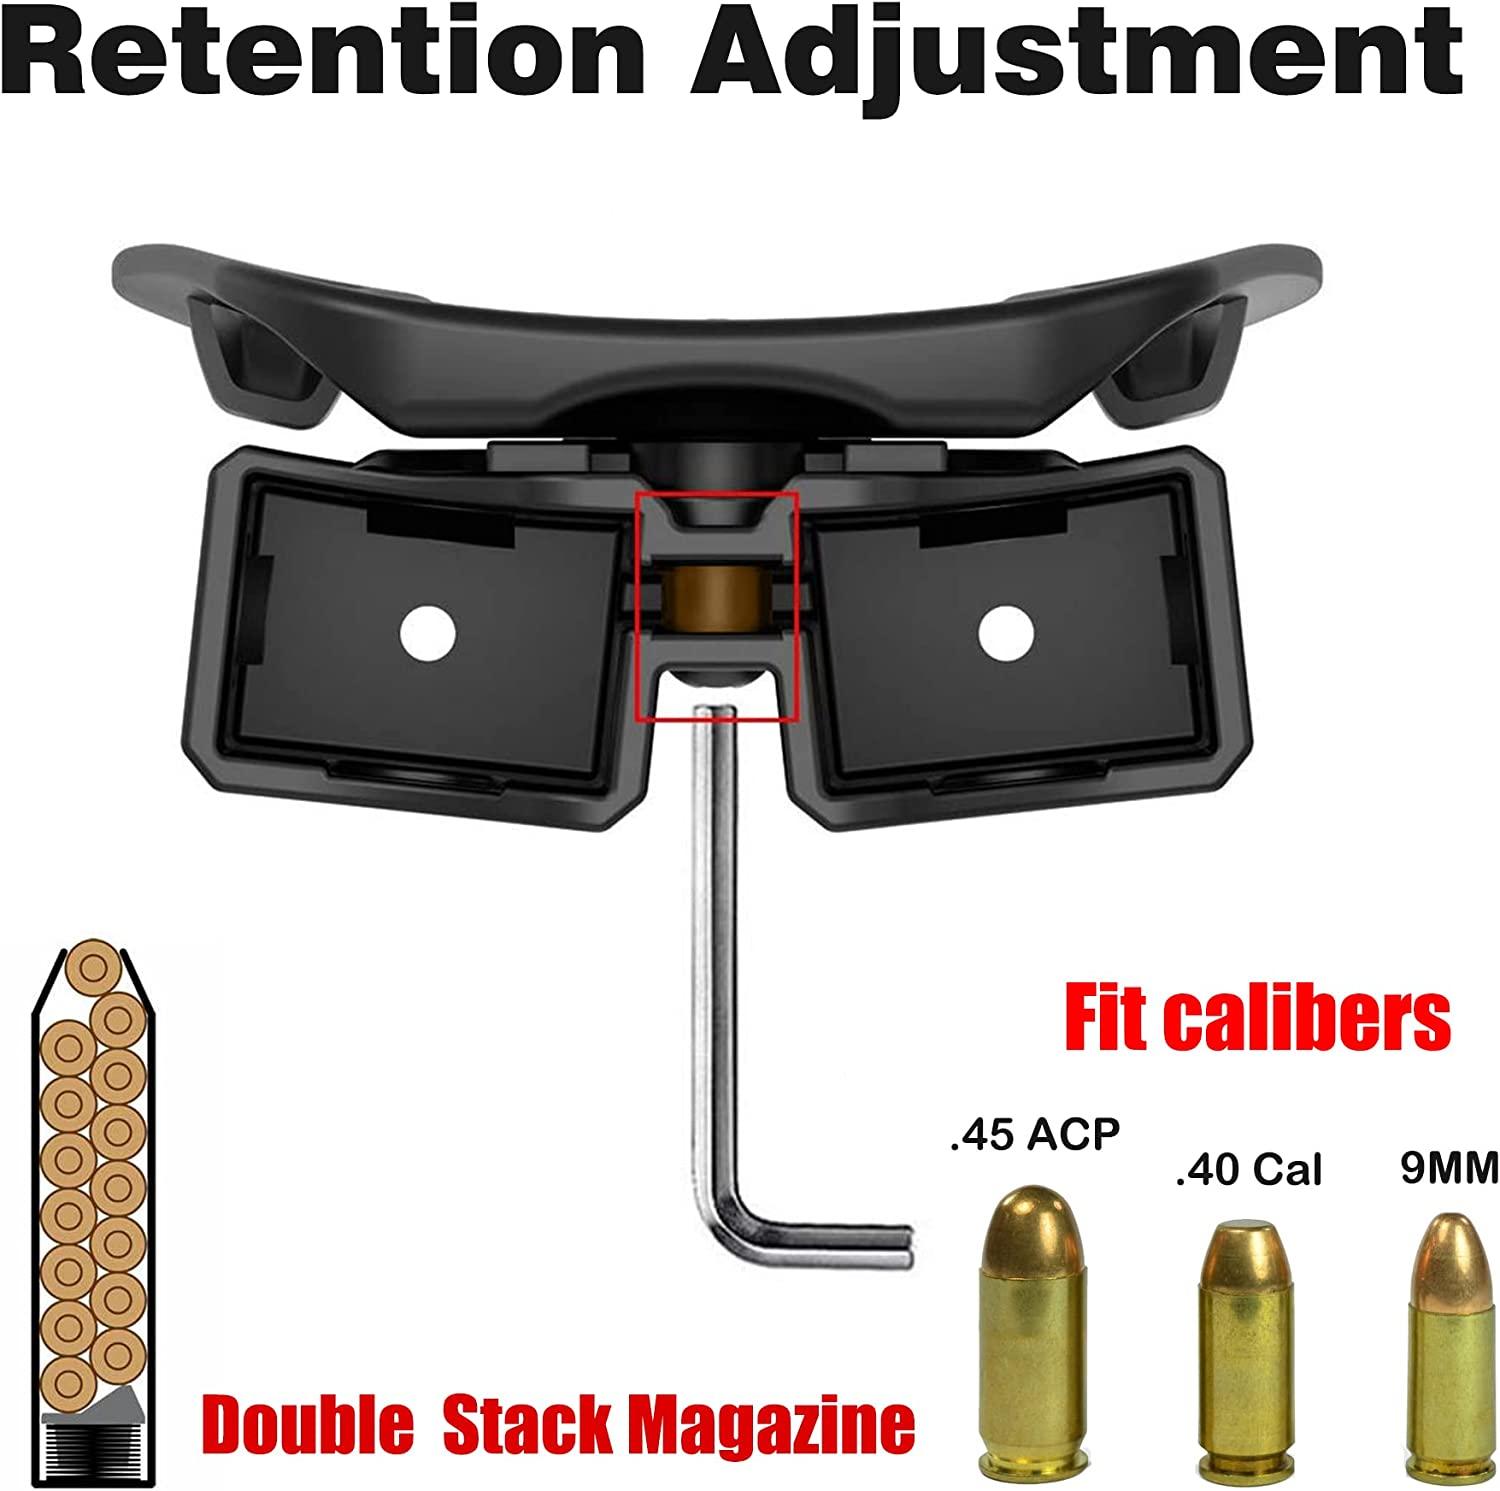 Universal Mag Carrier9mm.40 Double Stack9mm.40 Single Stack.45ACP Double  Stack.45ACP Single Stack MagsAdjustable Retention Magazine Holster  Universal Mag Holster B-9mm.40 Single Stack Mag Holster(MRD)